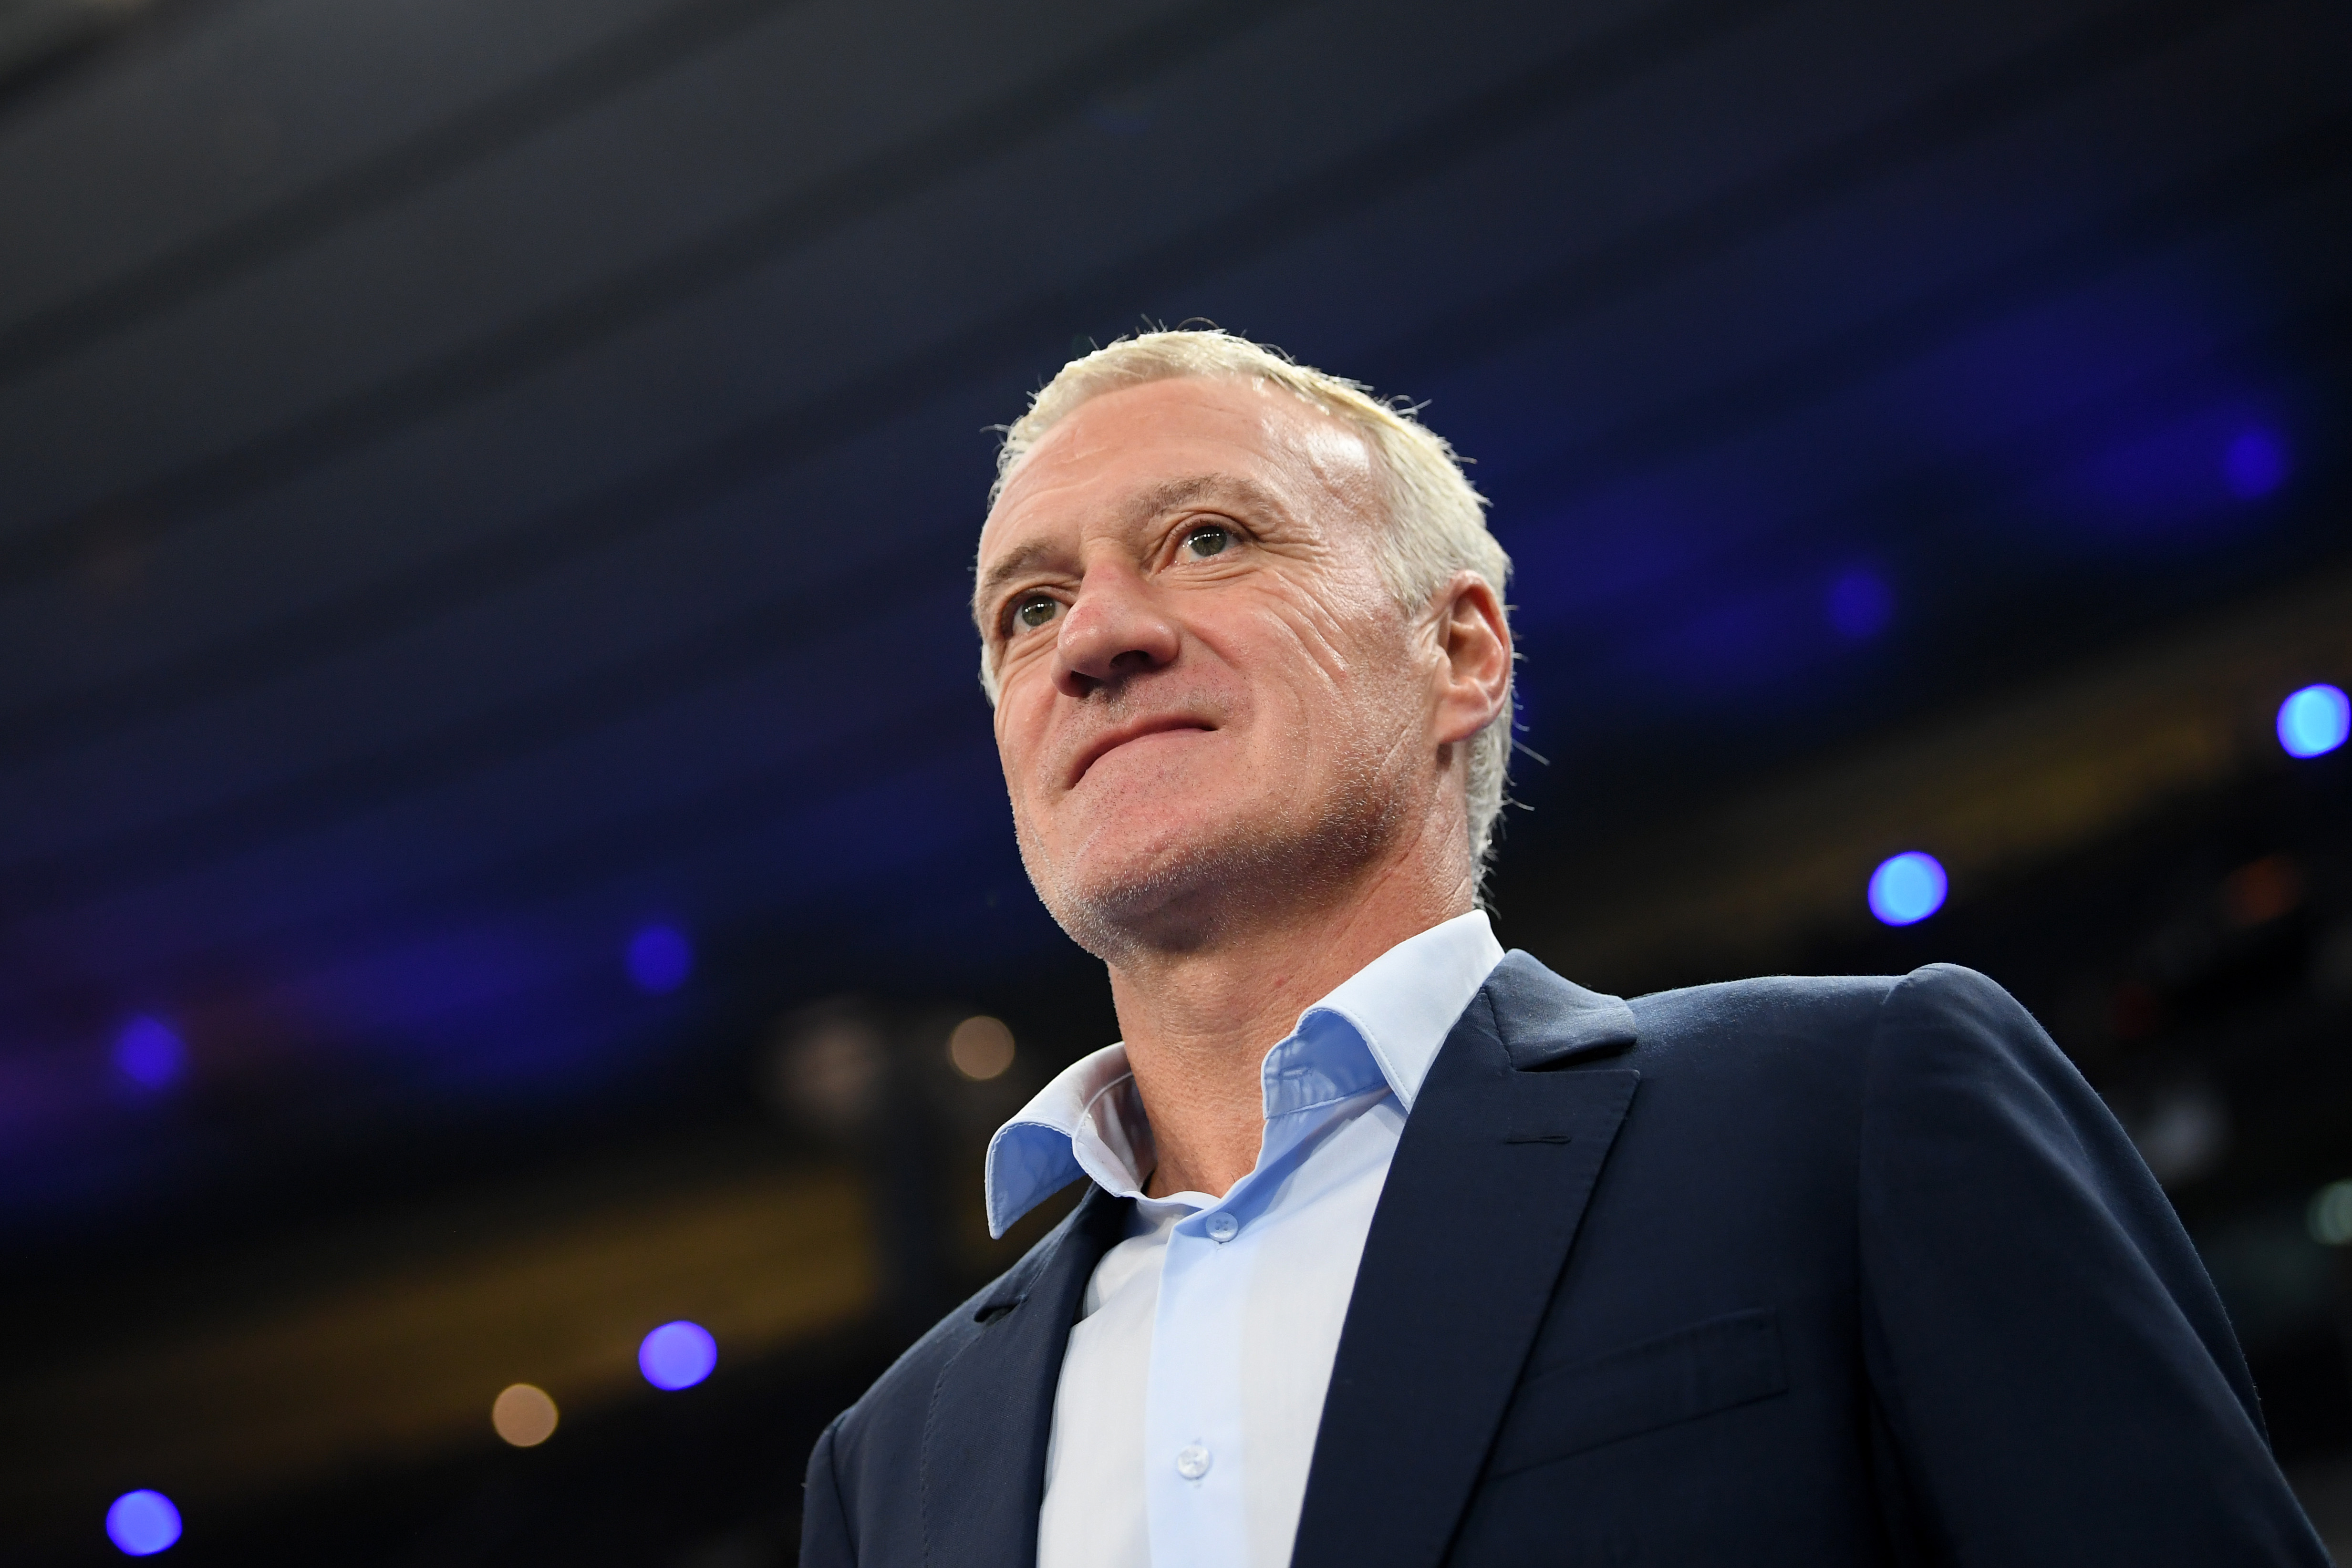 Didier Deschamps will be eager to see France win the World Cup again this year. (Photo by Matthias Hangst/Bongarts/Getty Images)